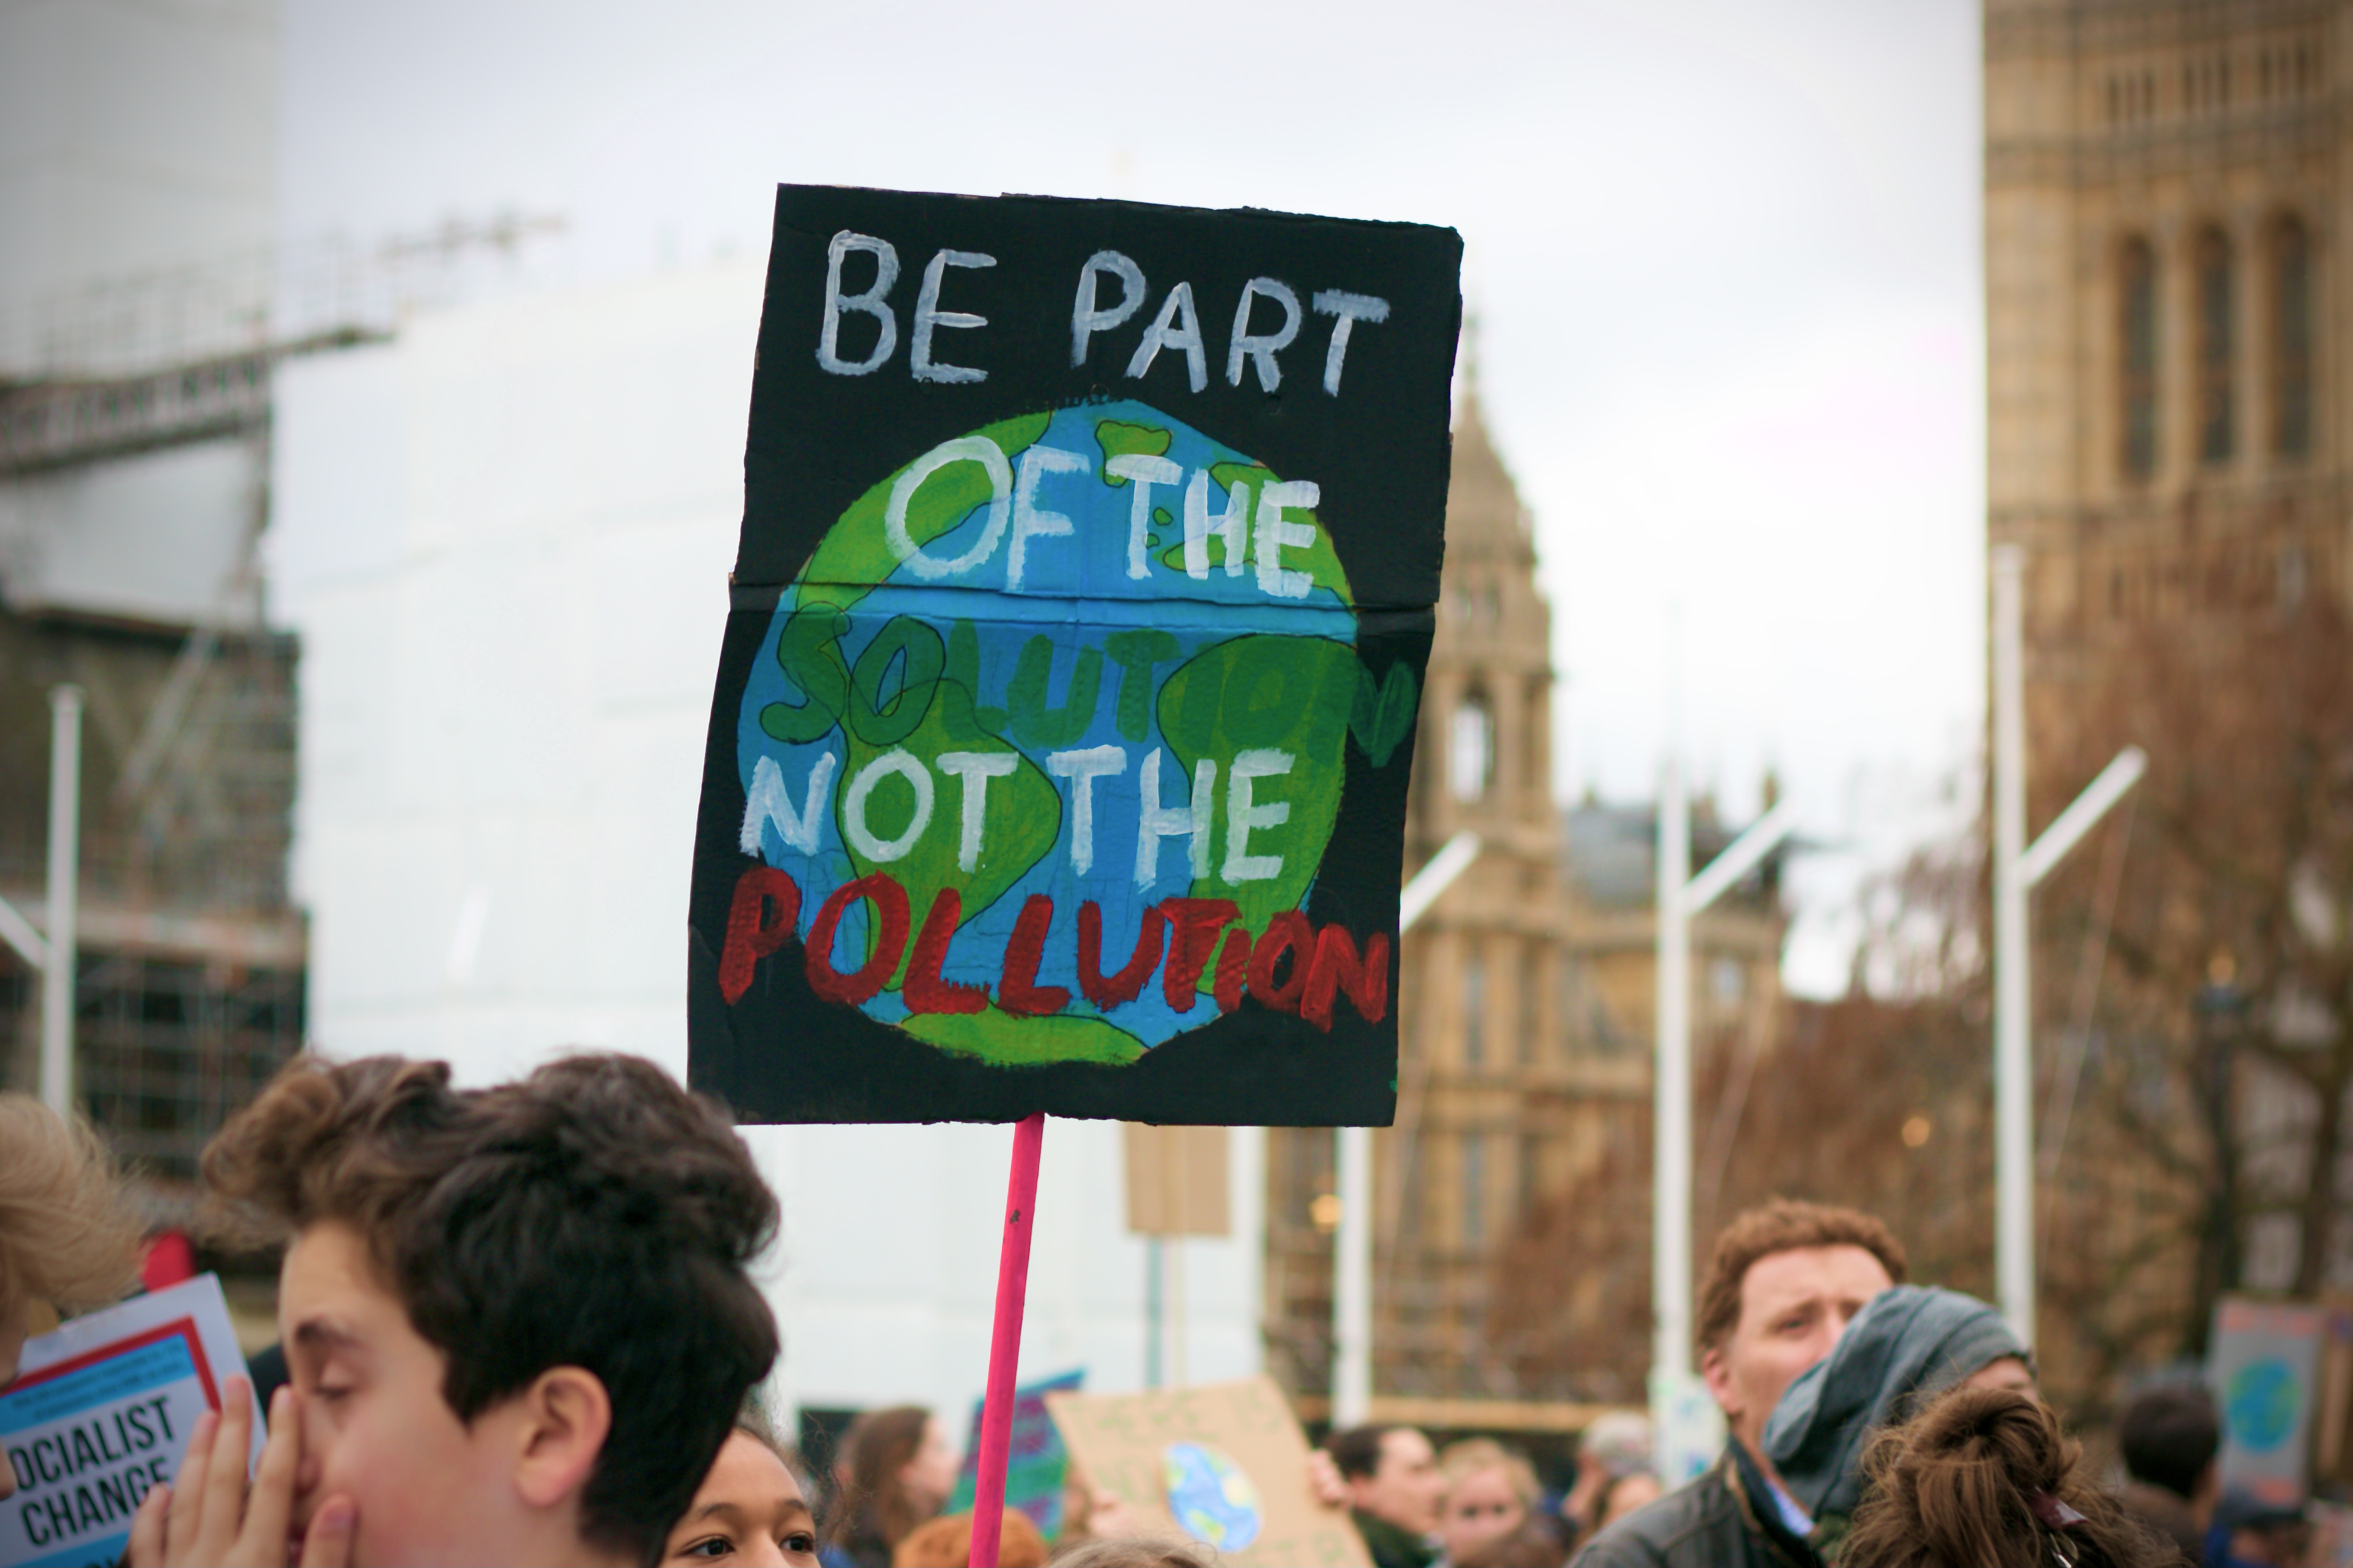 Focus or it’s game over – a response to the climate emergency